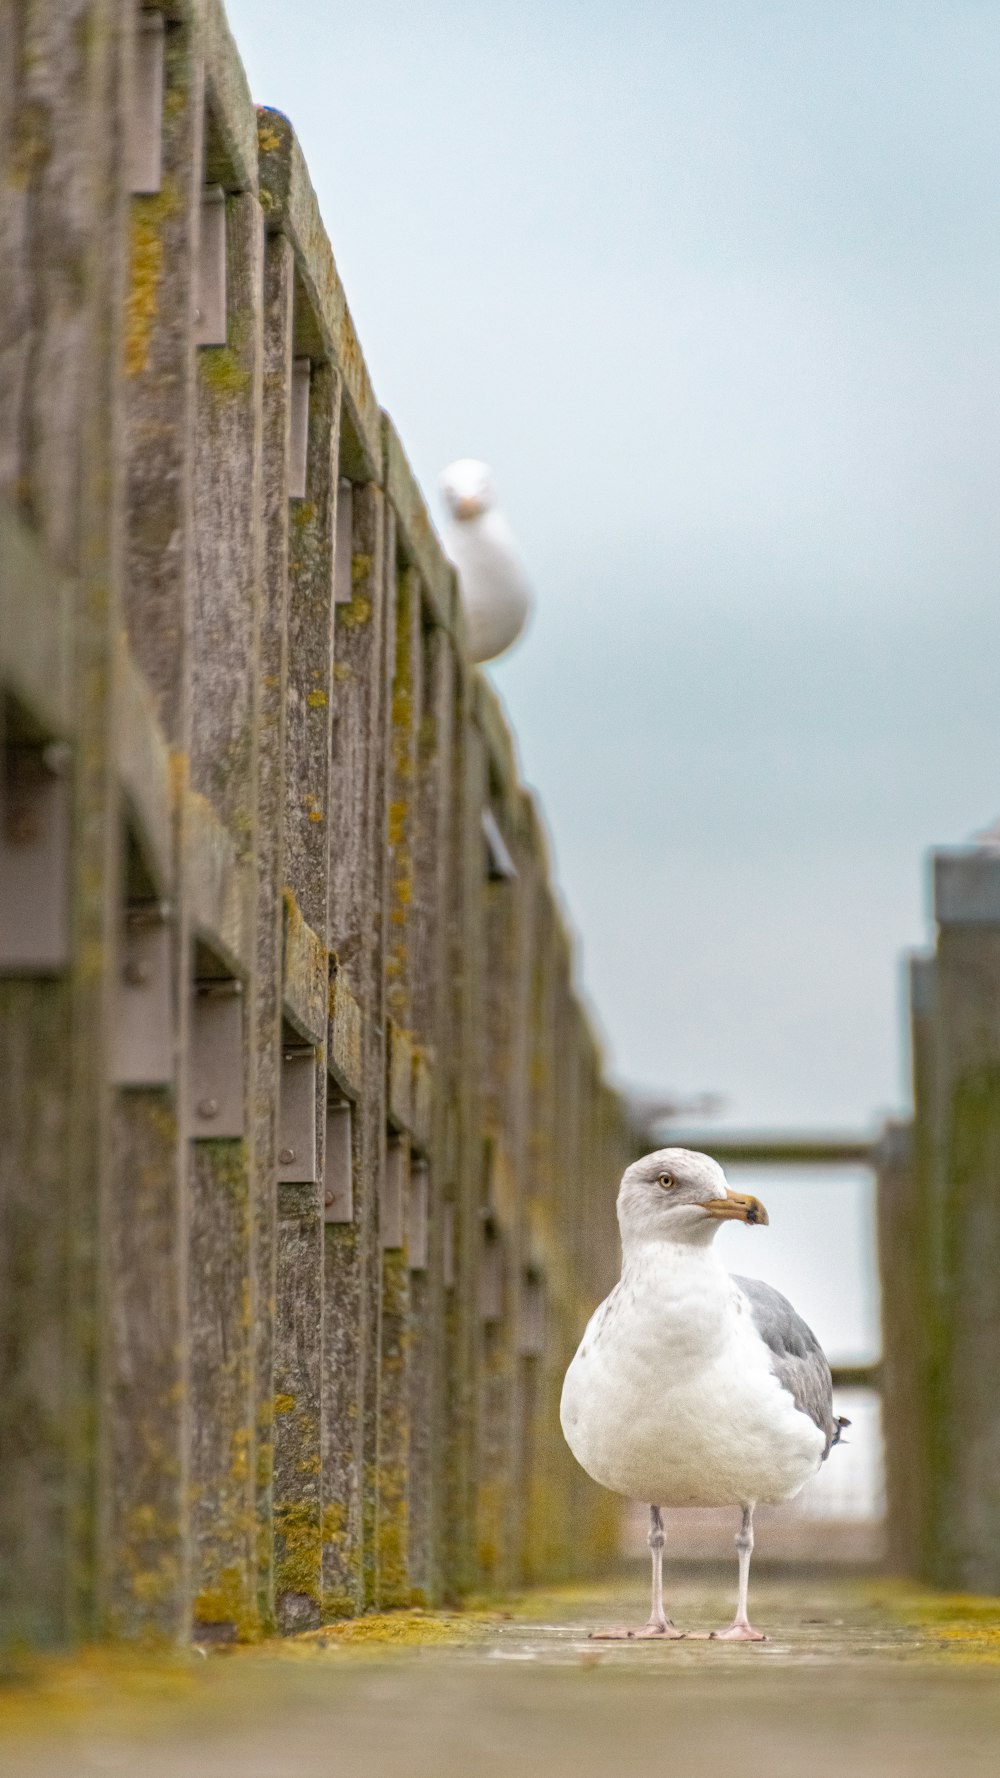 a seagull is standing on a concrete walkway